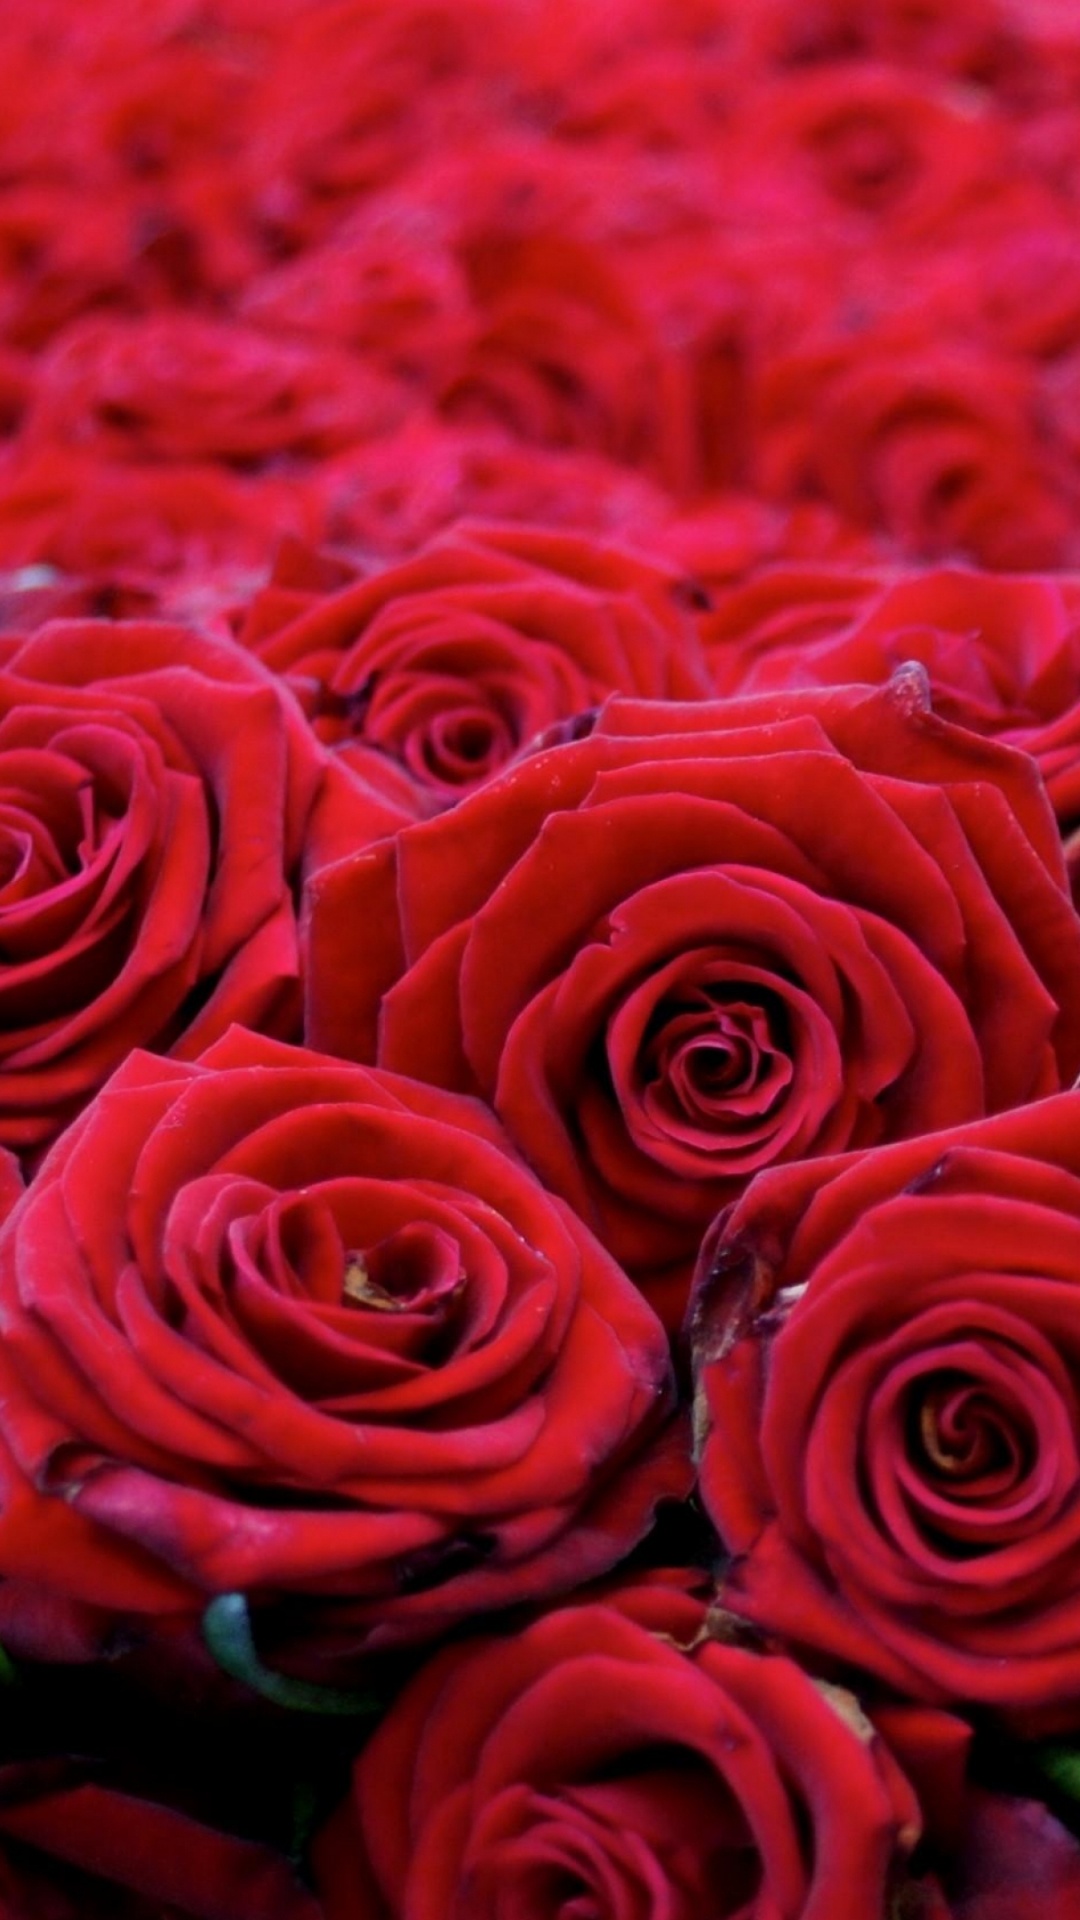 Roses Rouges Sur Textile Rouge. Wallpaper in 1080x1920 Resolution